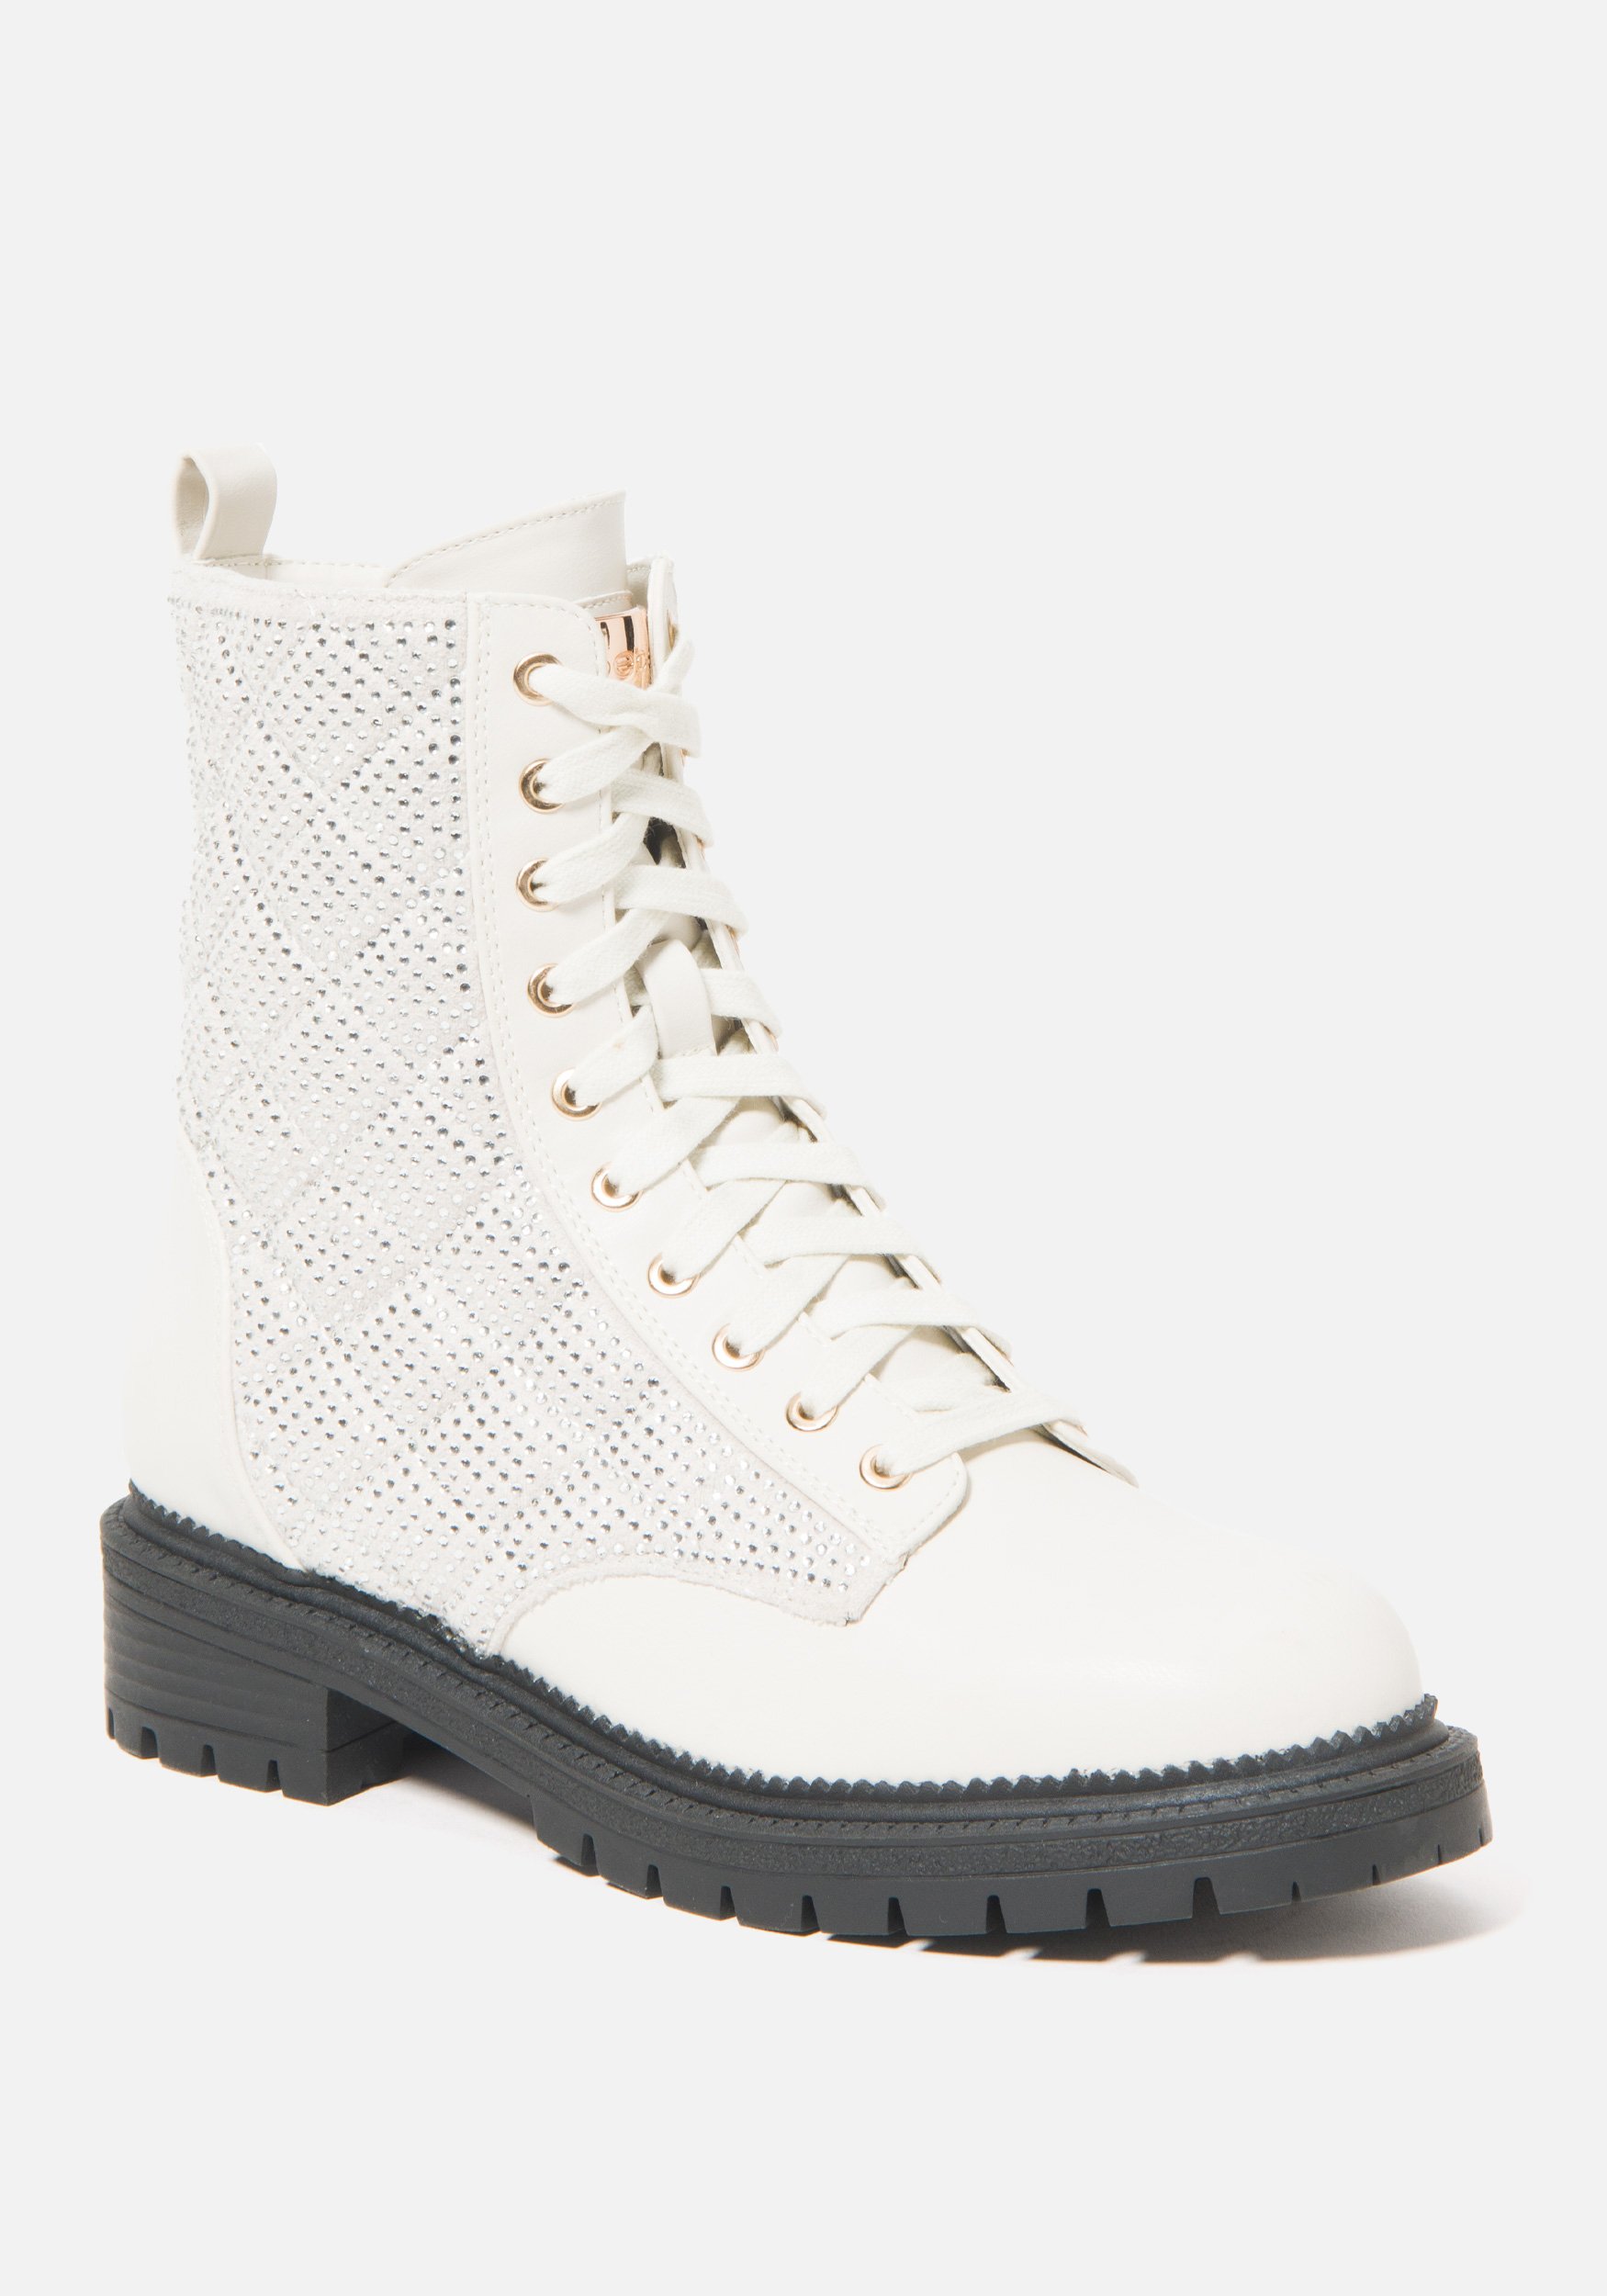 Bebe Women's Dorienne Lace Combat Boots, Size 7.5 in Off White Synthetic